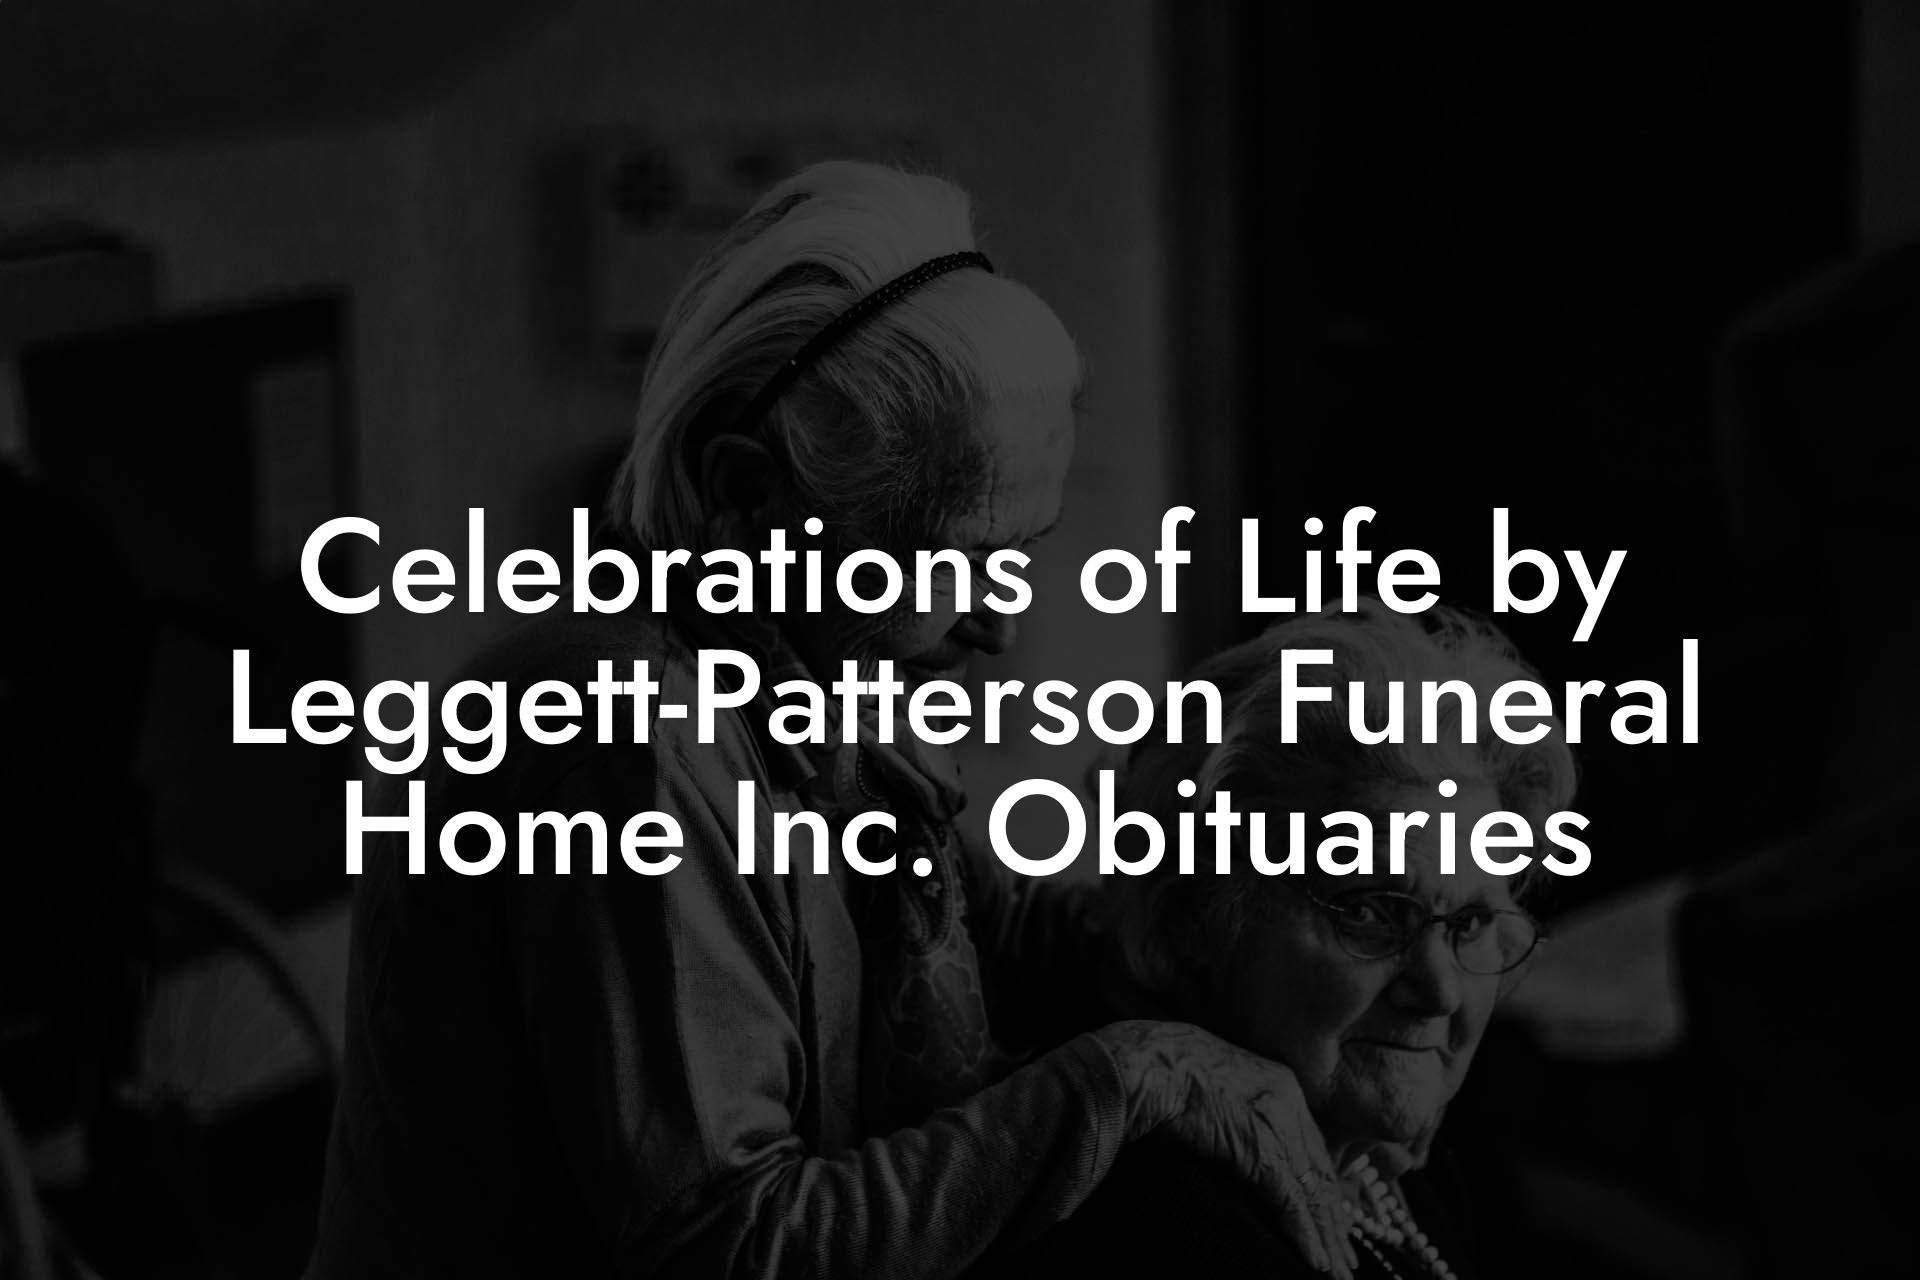 Celebrations of Life by Leggett-Patterson Funeral Home, Inc. Obituaries